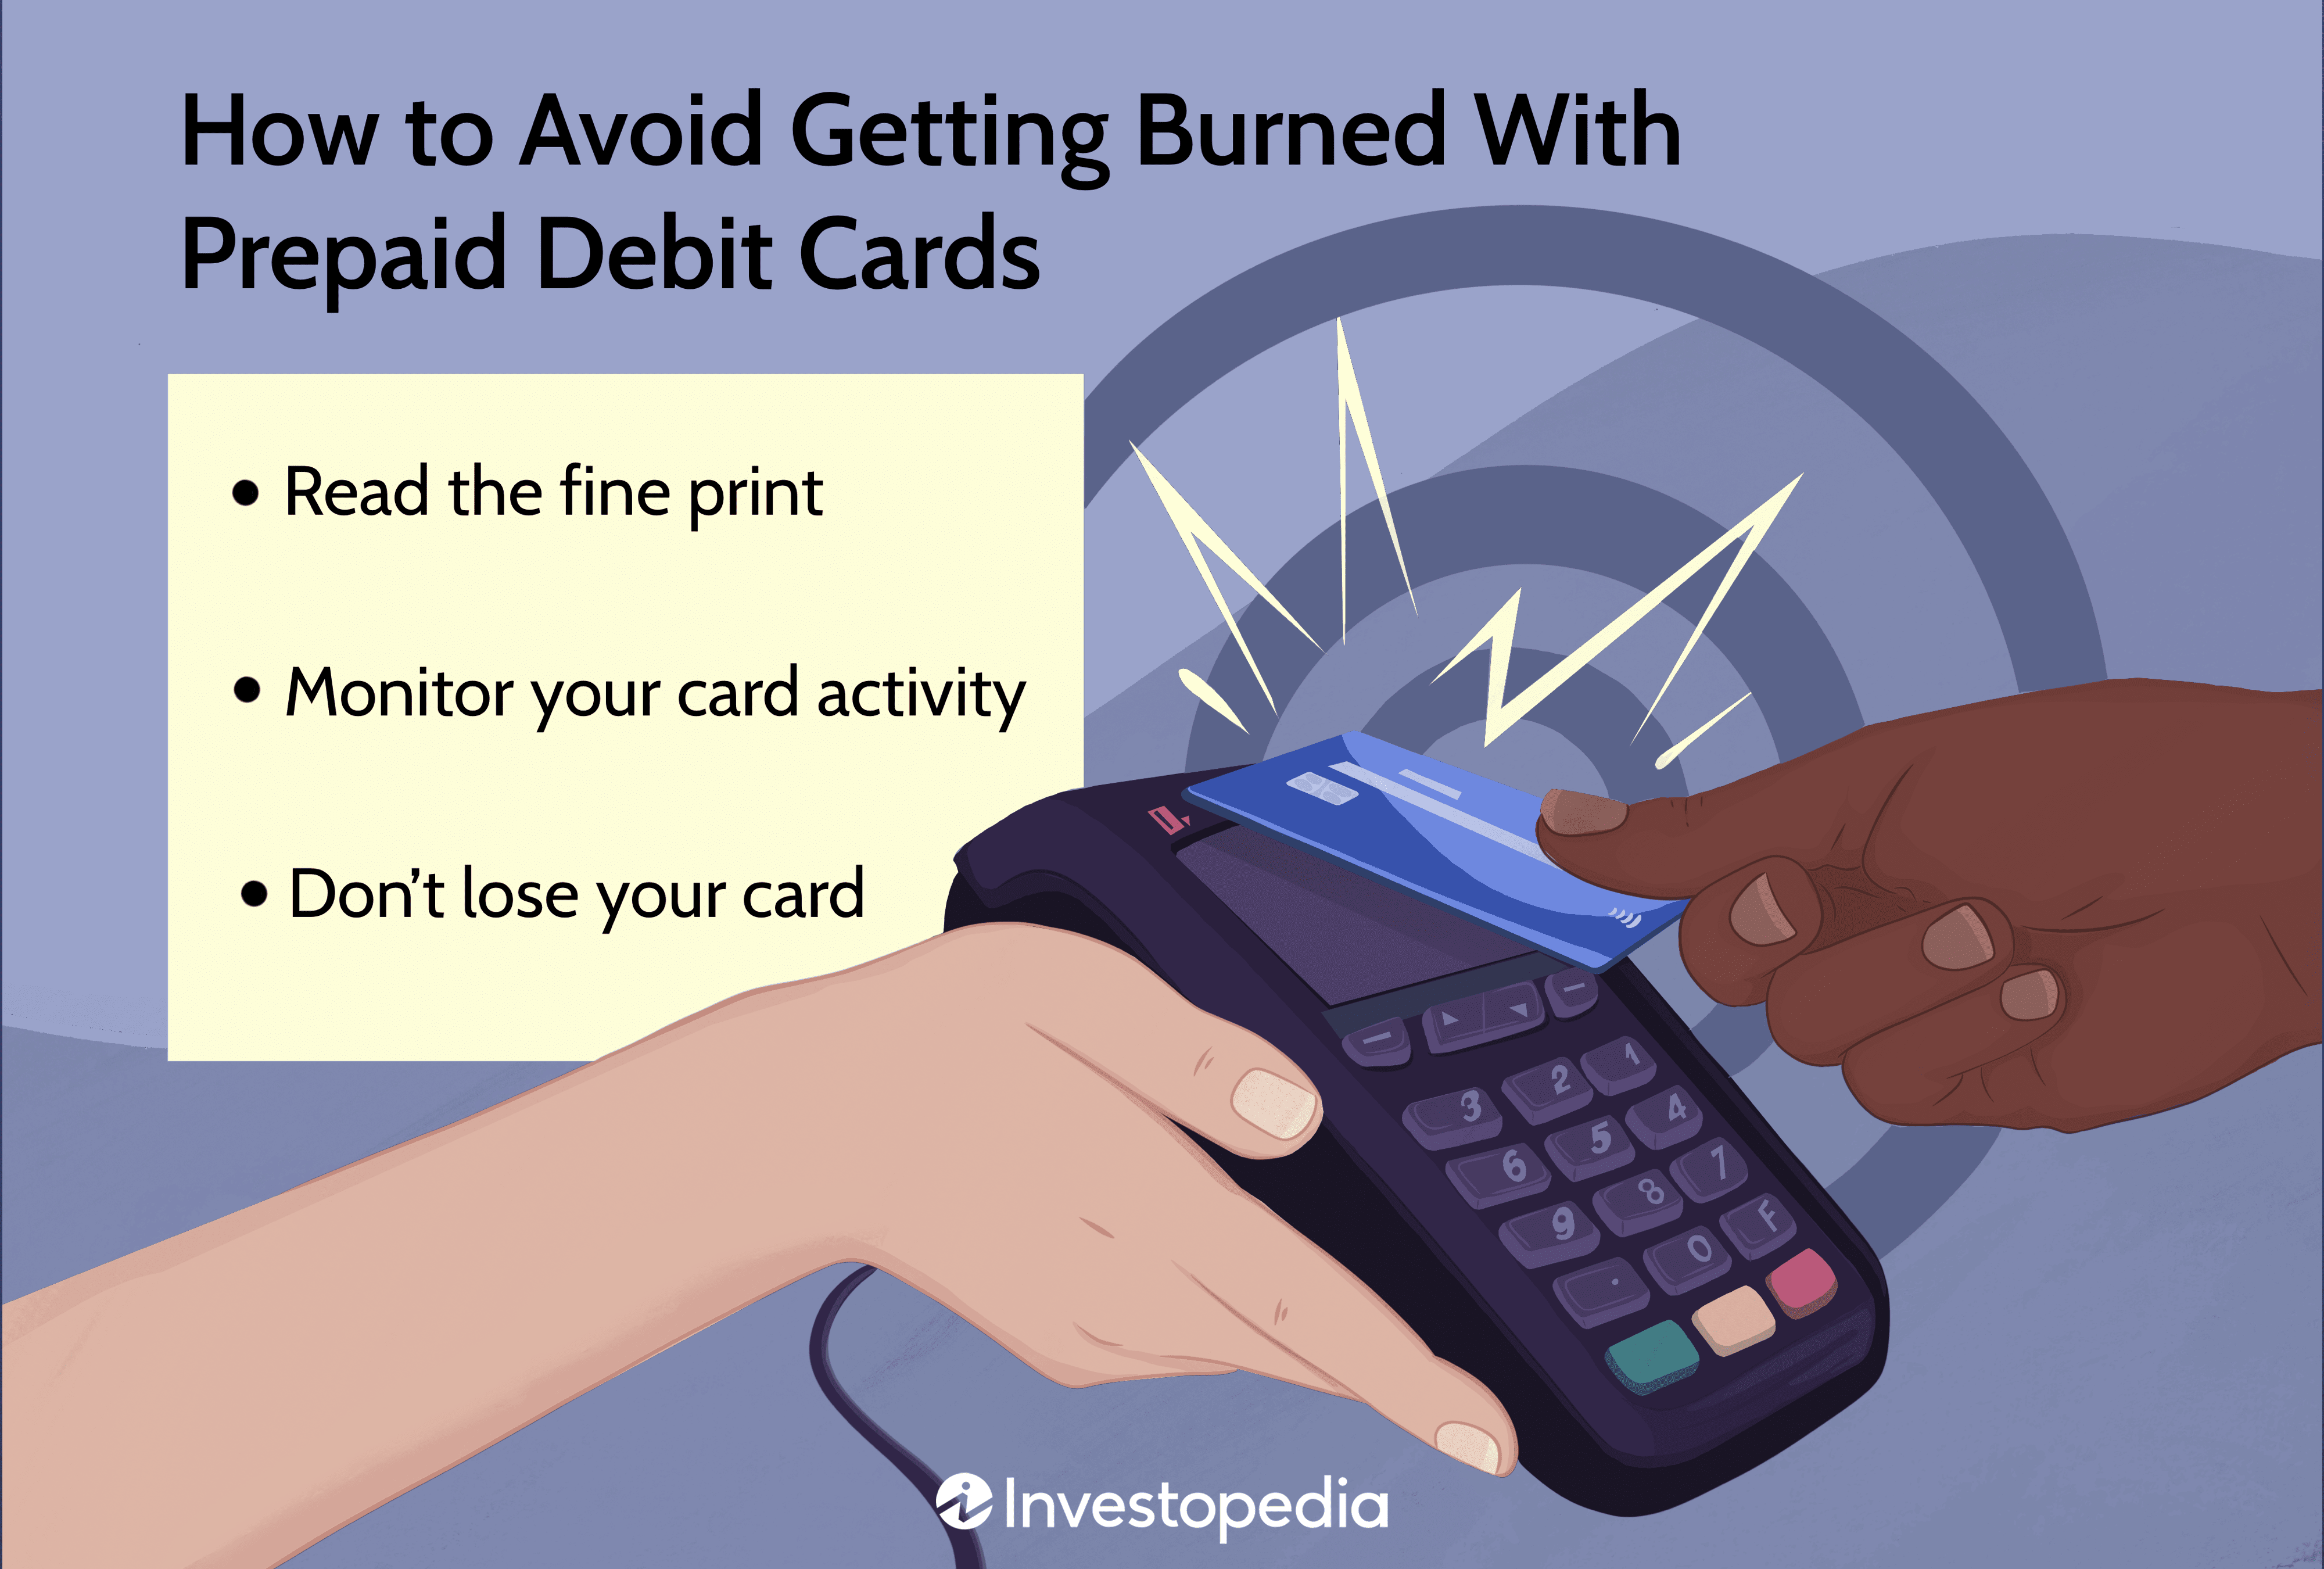 How to Avoid Getting Burned With Prepaid Debit Cards